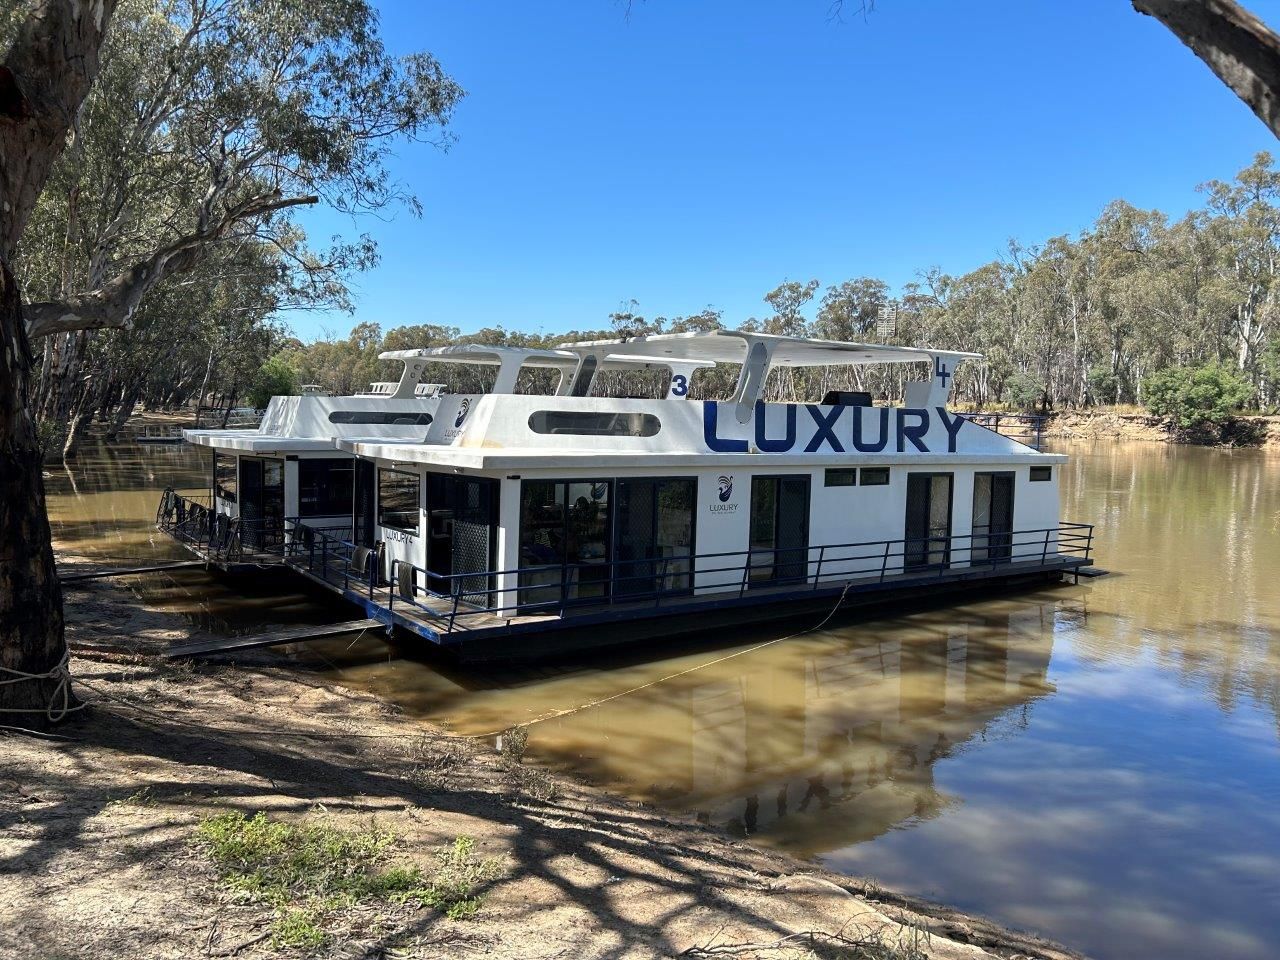 Luxury on the Murray' Houseboats - Business for Sale, Moama NSW 2731, Image 1